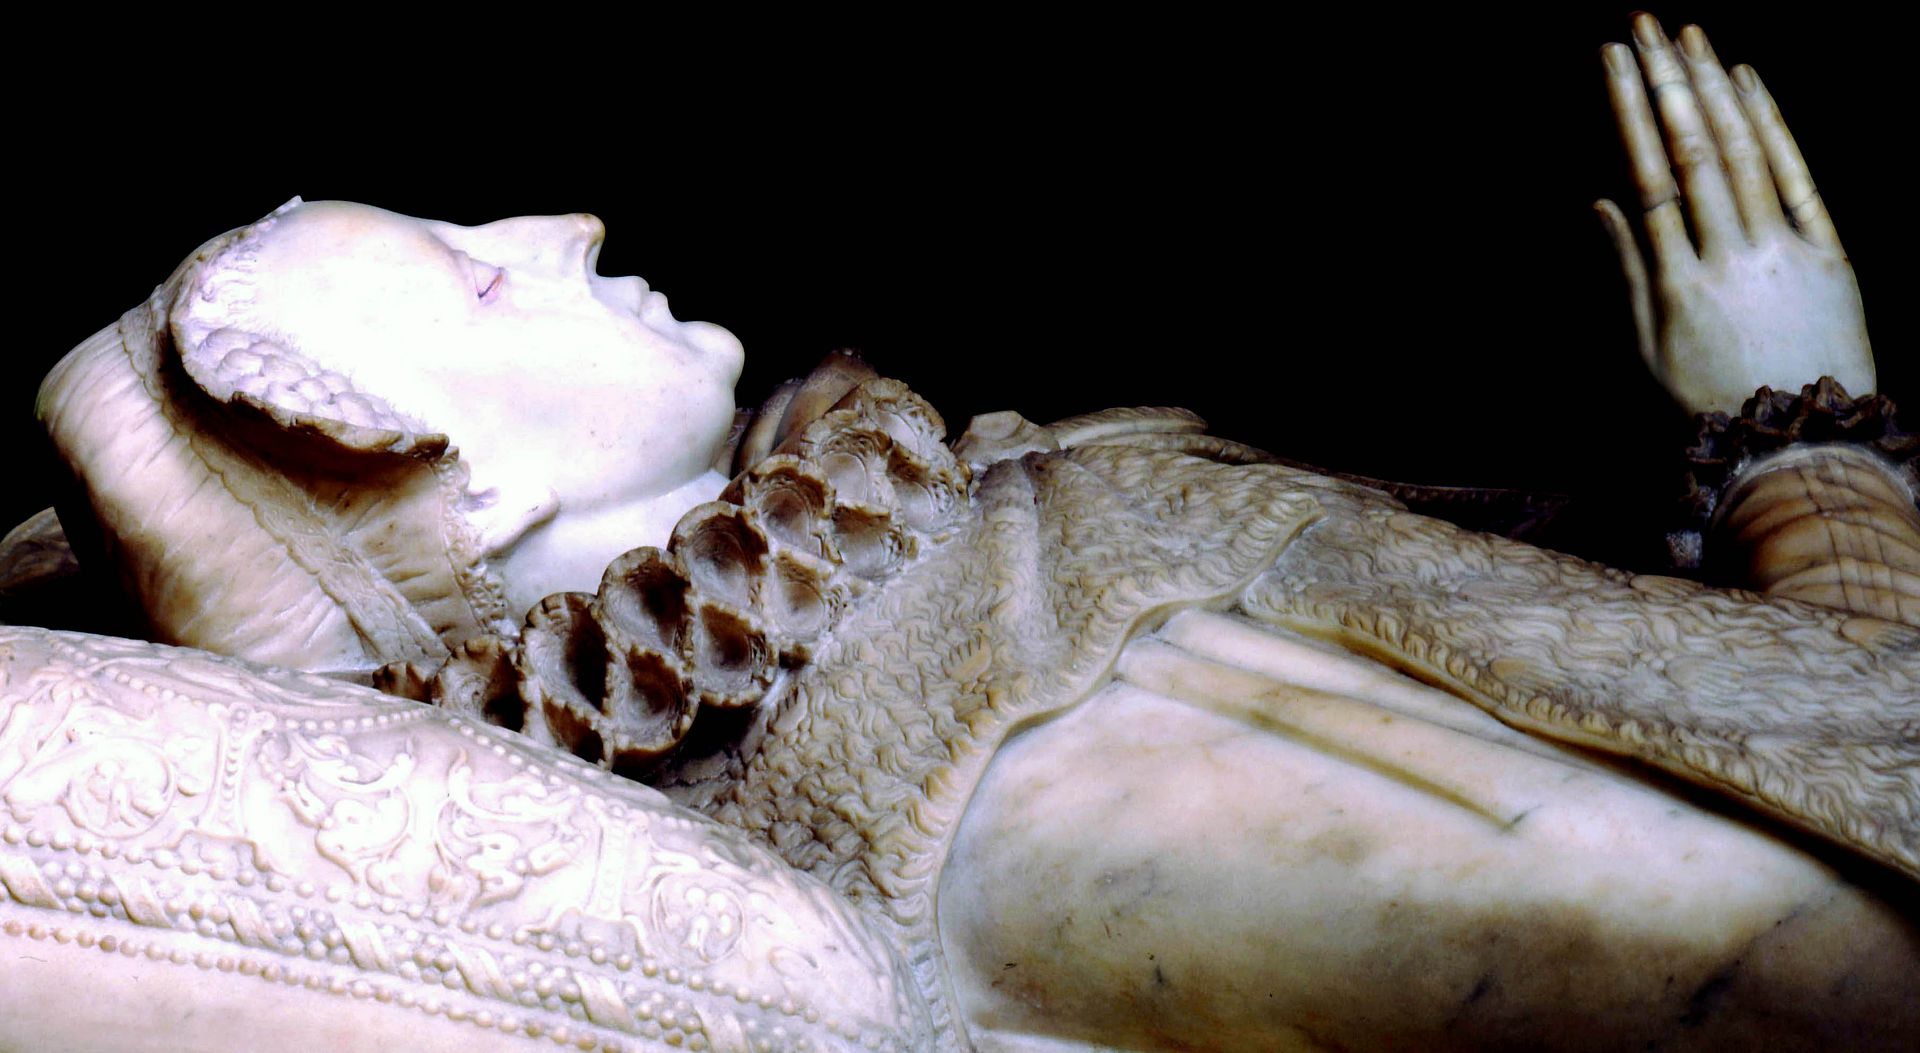 26.The-tomb-of-Mary-Queen-of-Scots_zpsiefzv3yw.jpg